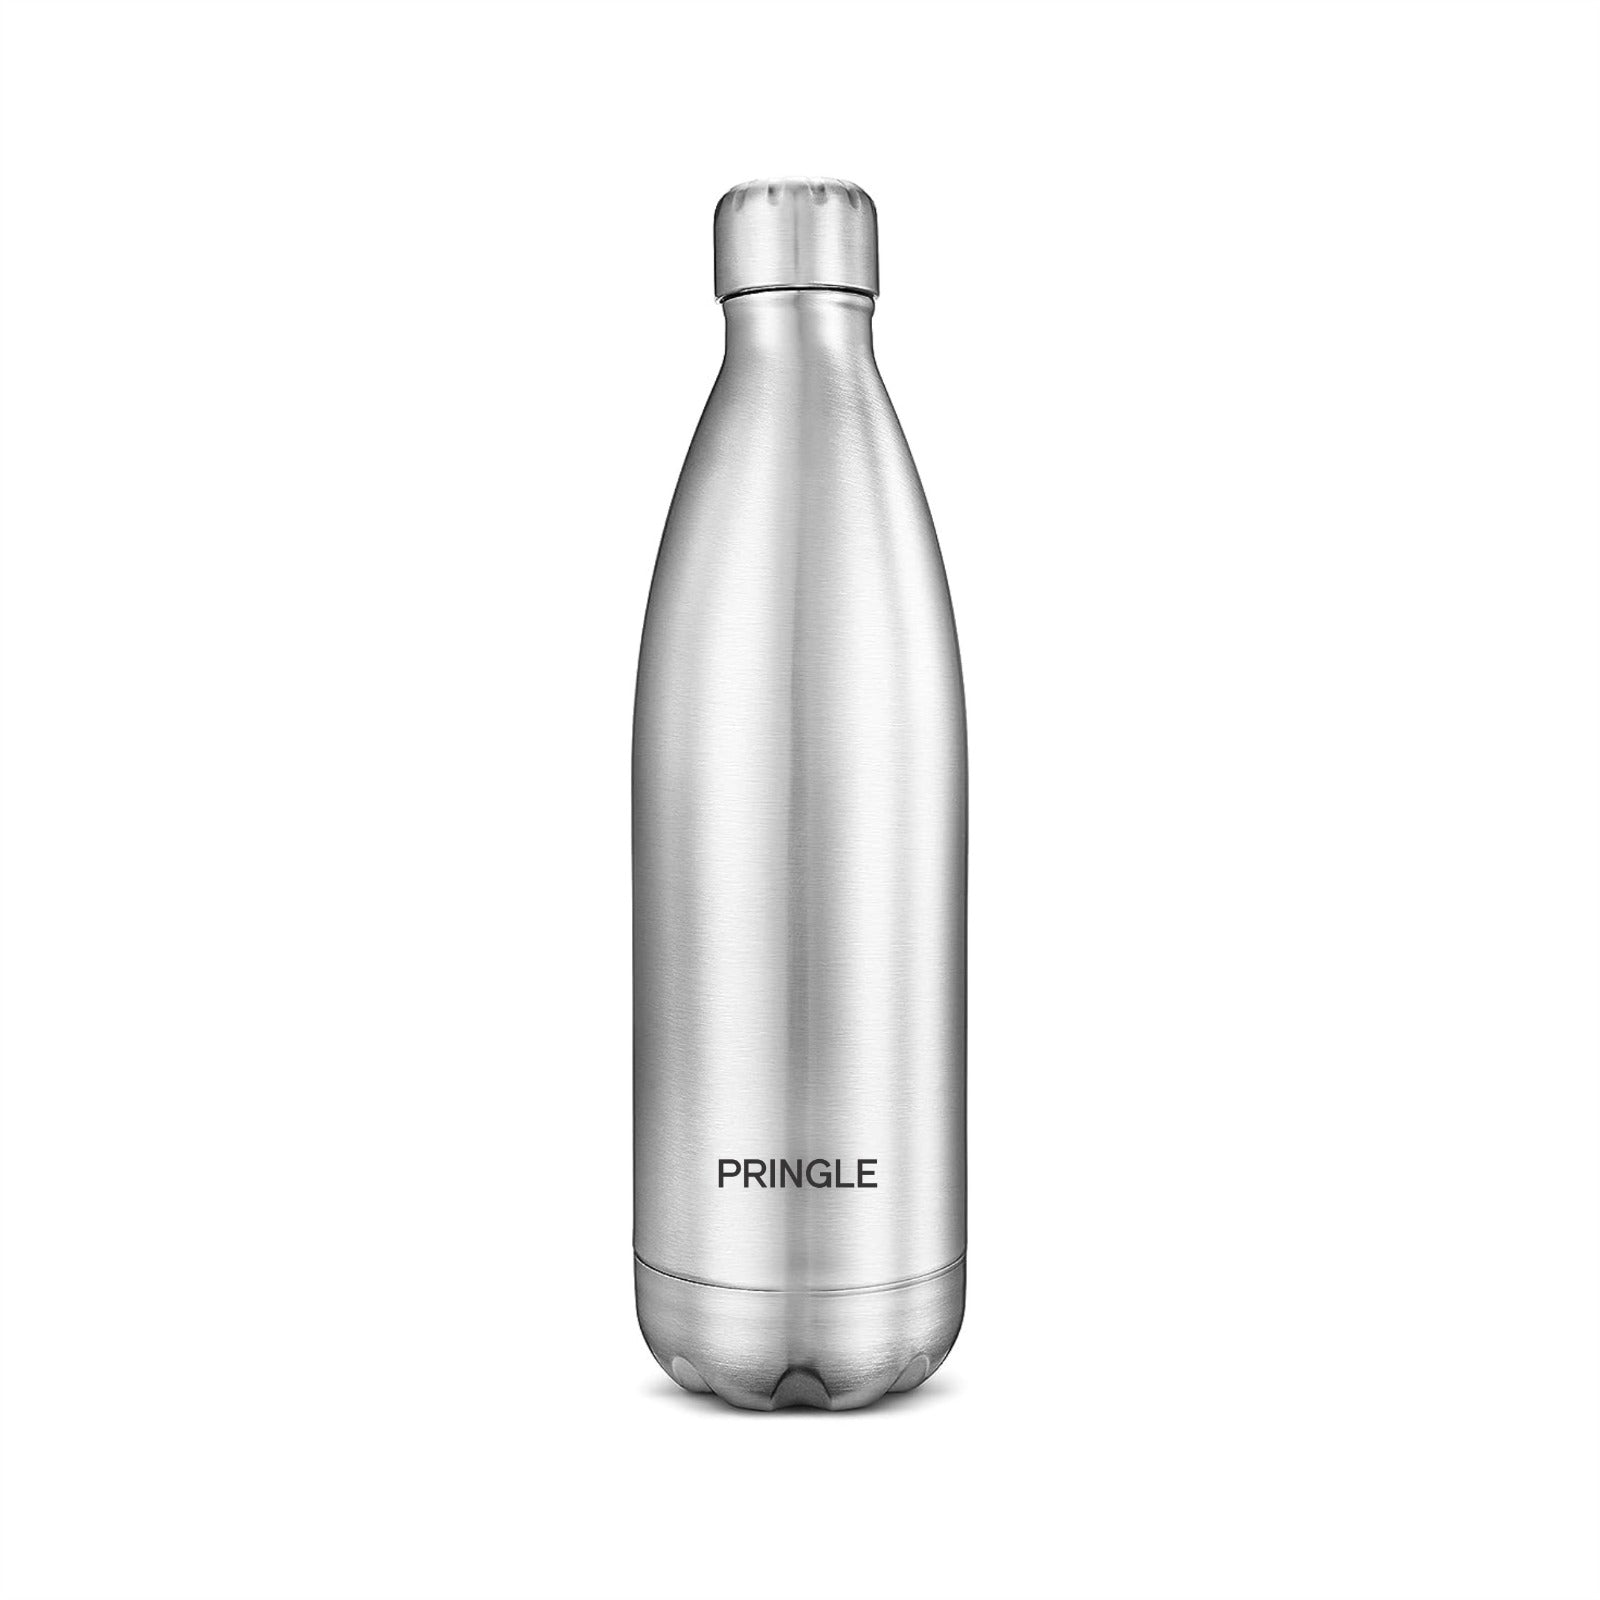 Pringle Lagoon Stainless Steel Hot and Cold Vacuum Insulated Flask, 500ml, Steel, | Lightweight & Keeps Drinks Hot/Cold for 24+ Hours - Pringle Appliances